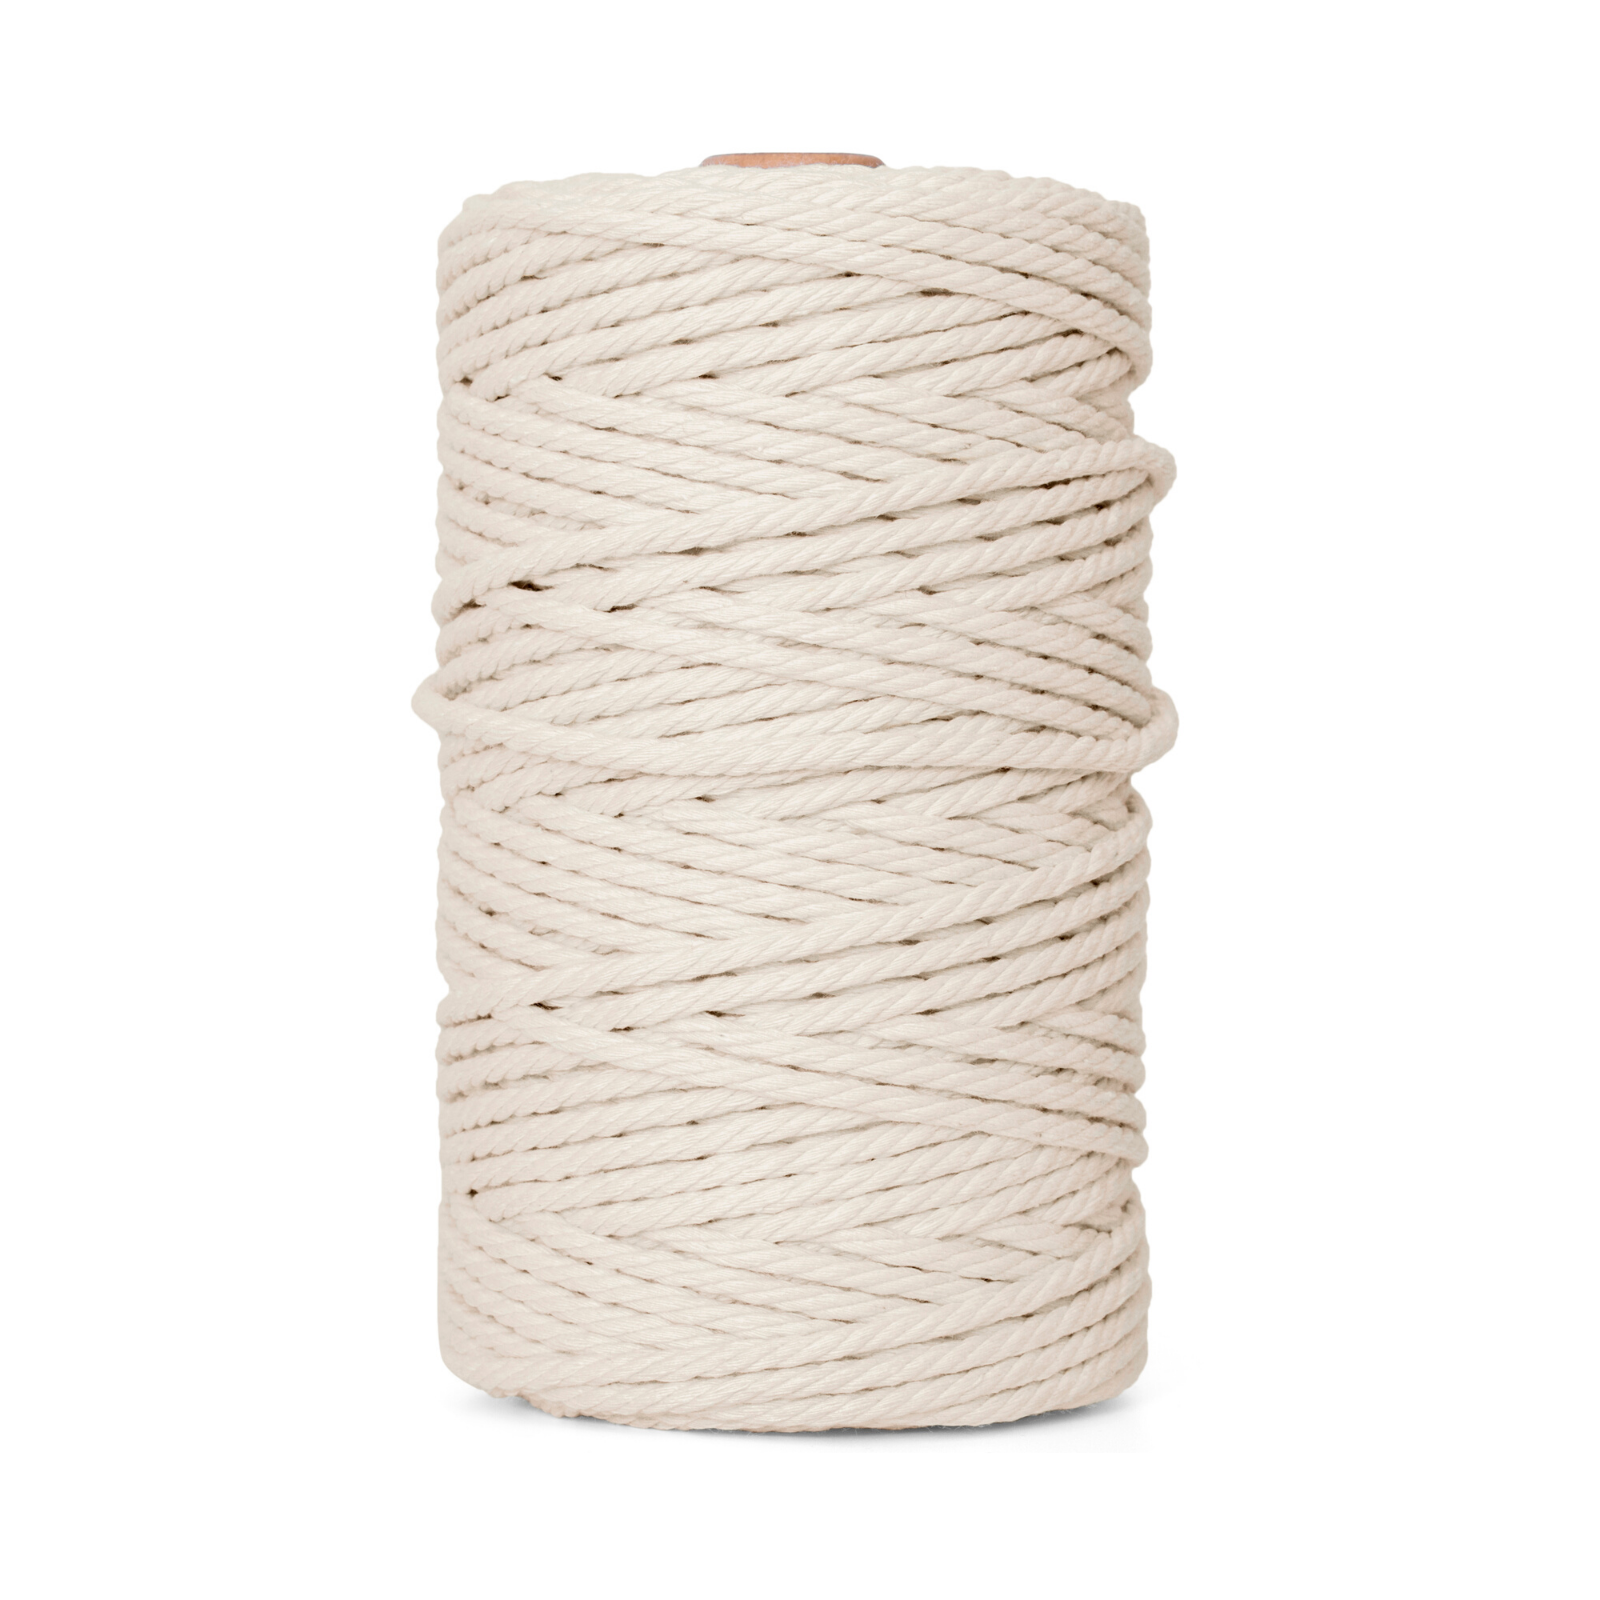 Macrame String Cotton Rope 109 Yards Macrame Supplies for Wall Hangers & Boho Decorations Nook Theory Macrame Cord 3 4 5mm Flexible & Soft Rope Perfect for Knots Cream, 5mm 